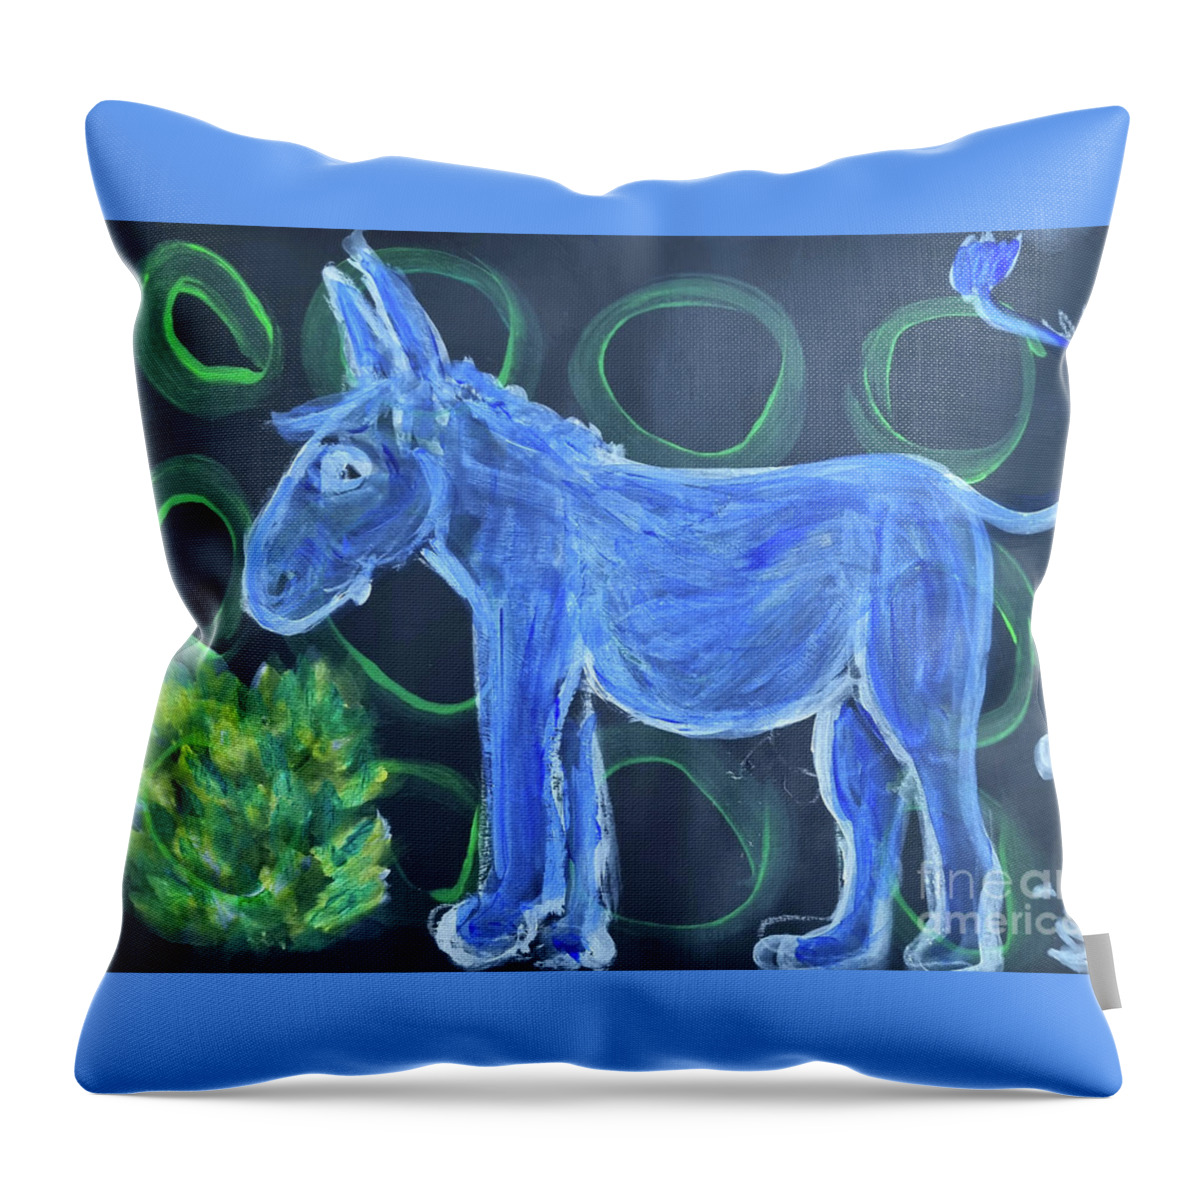 Donkey Throw Pillow featuring the painting Little Blue Donkey by Mimulux Patricia No